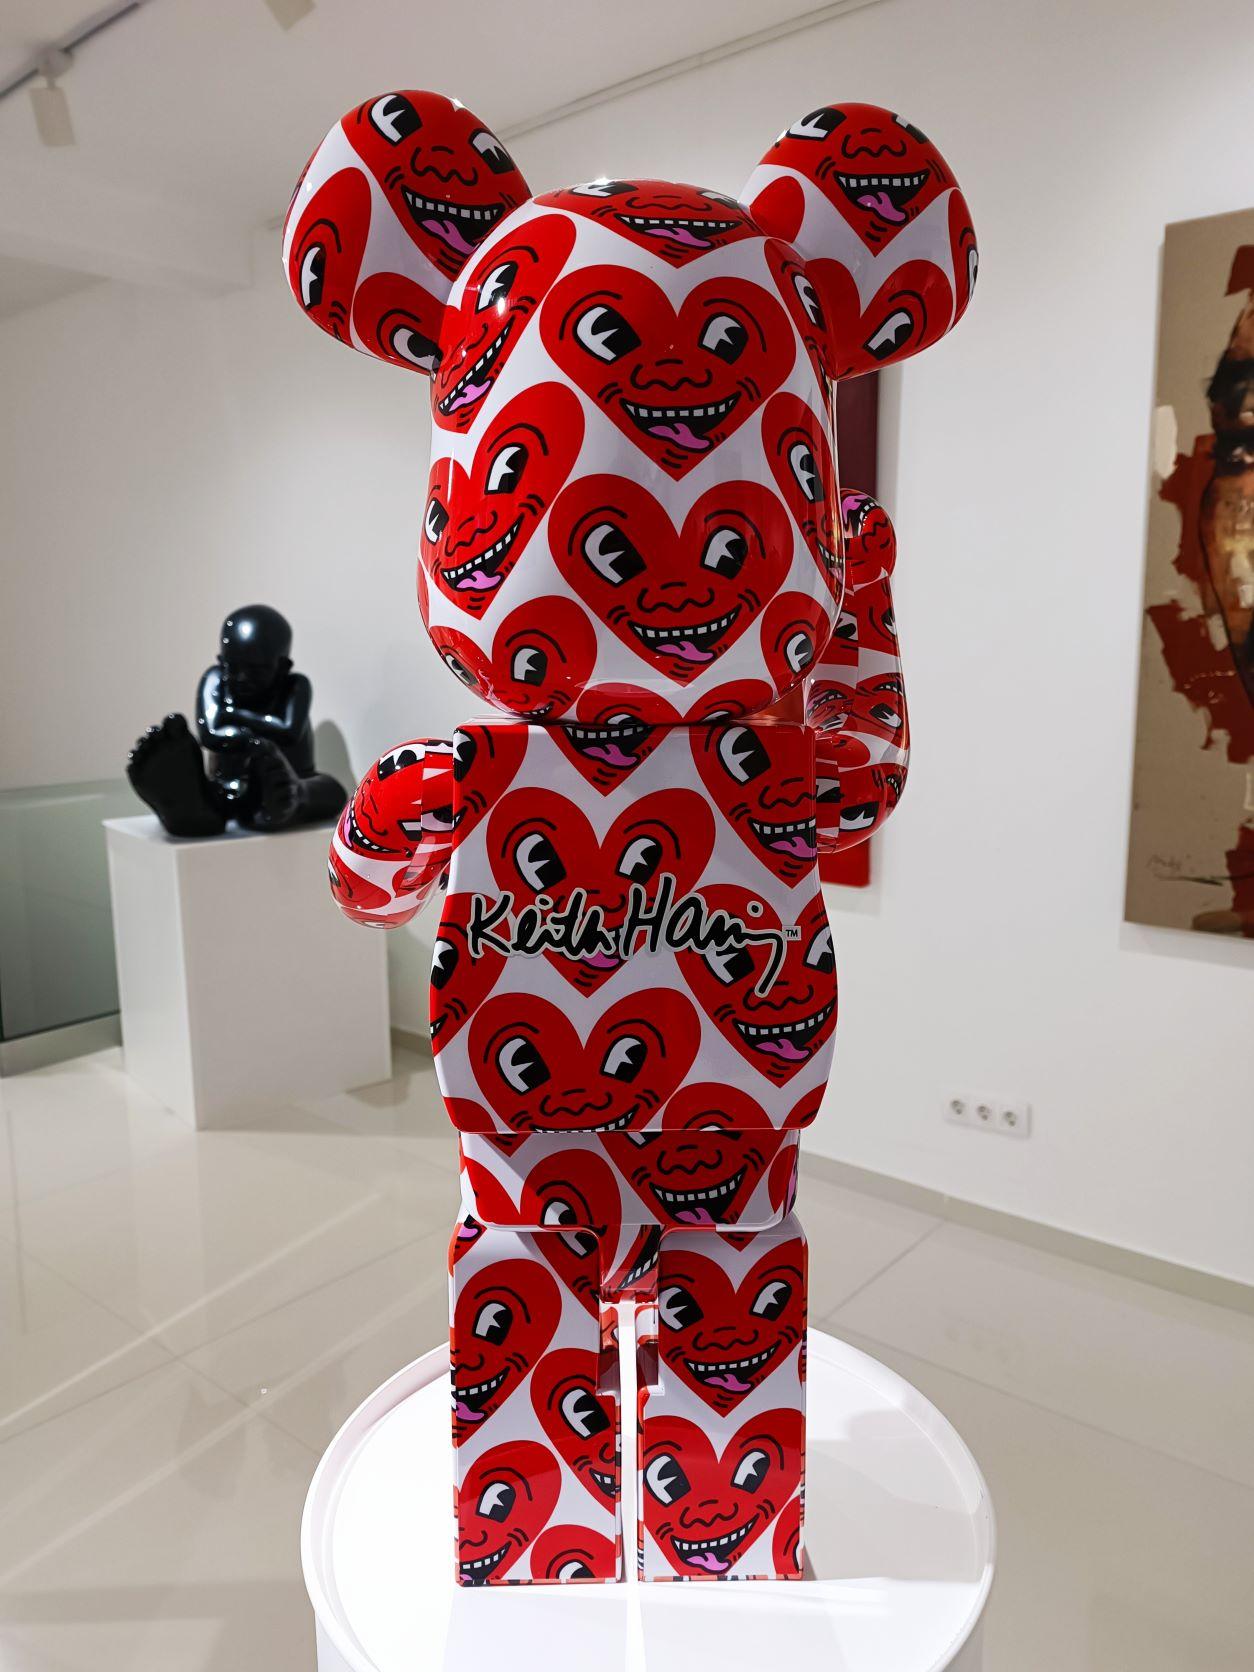 Bearbrick 1000% Keith Haring - Sculpture by MEDICOM TOY